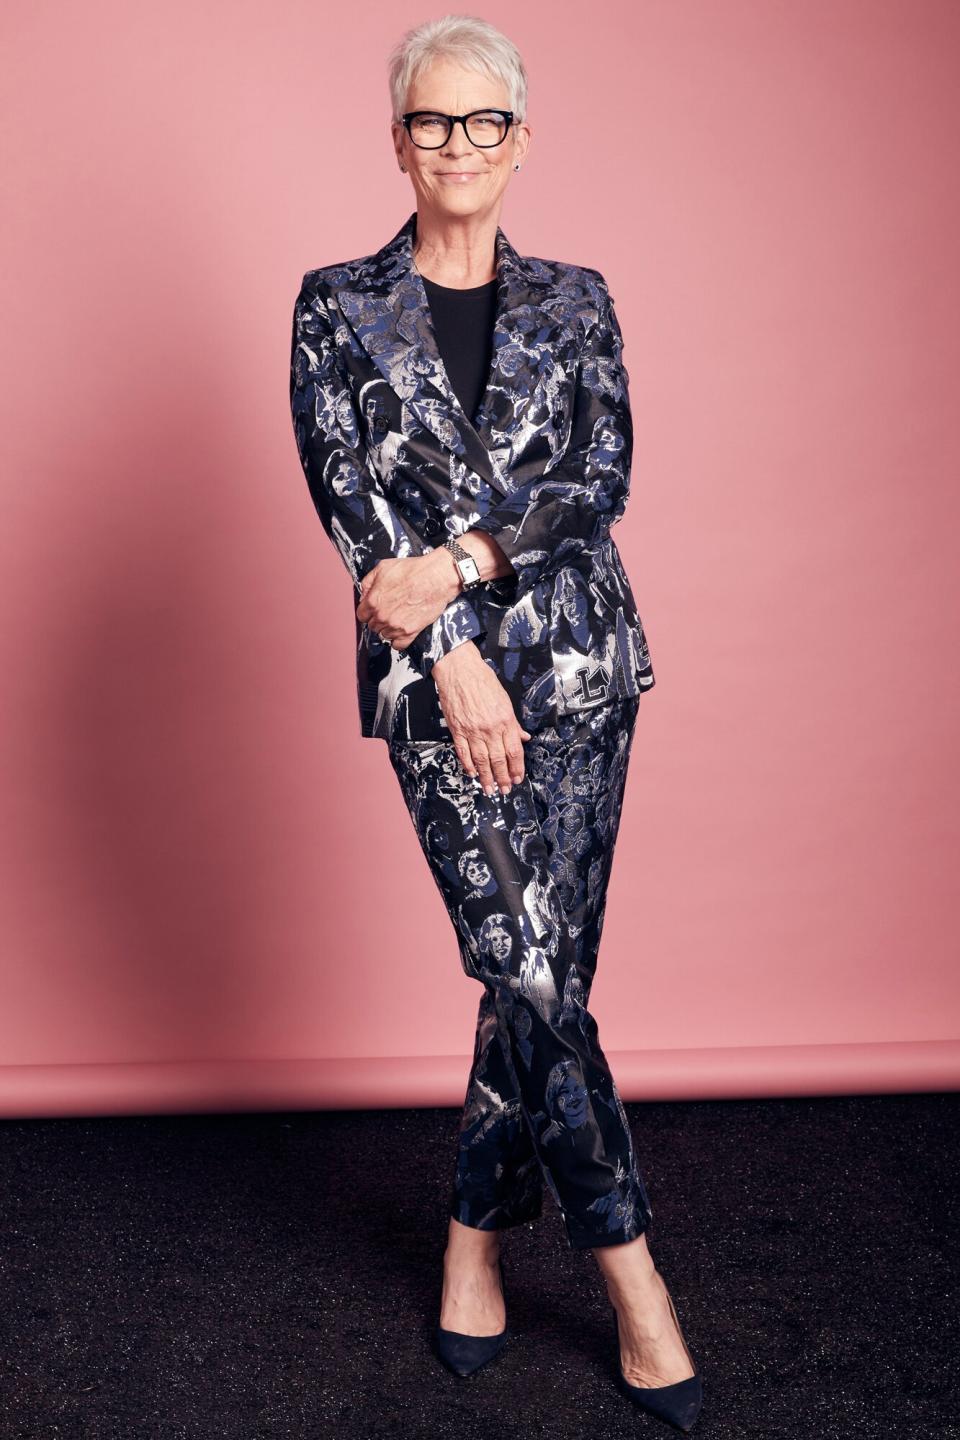 Jamie Lee Curtis poses in the IMDb Portrait Studio at the 2023 Independent Spirit Awards on March 04, 2023 in Santa Monica, California.